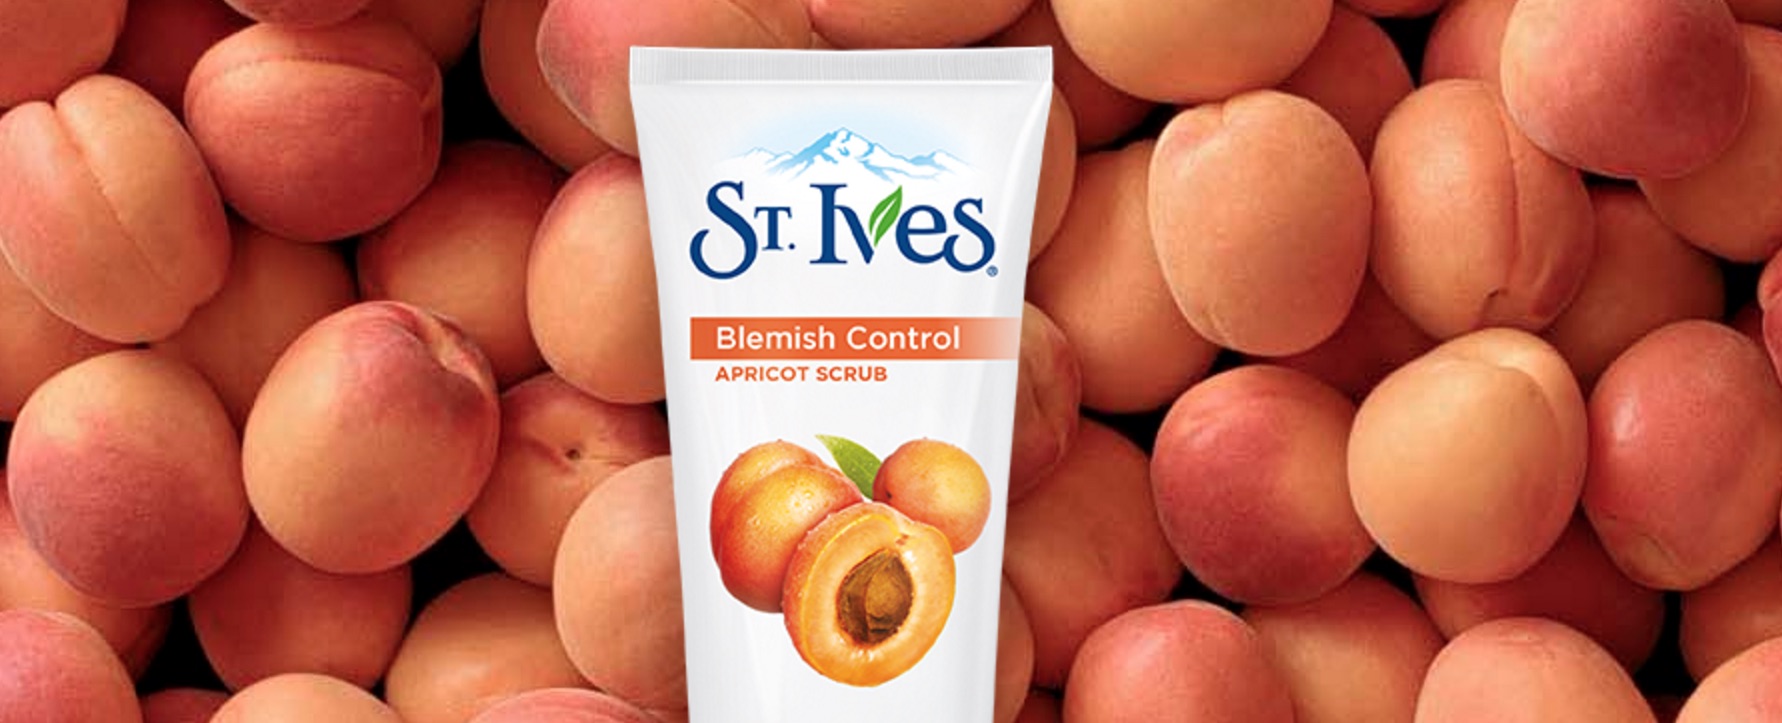 St. Ives Apricot Scrub Lawsuit Exposes Raging Controversy Over Product